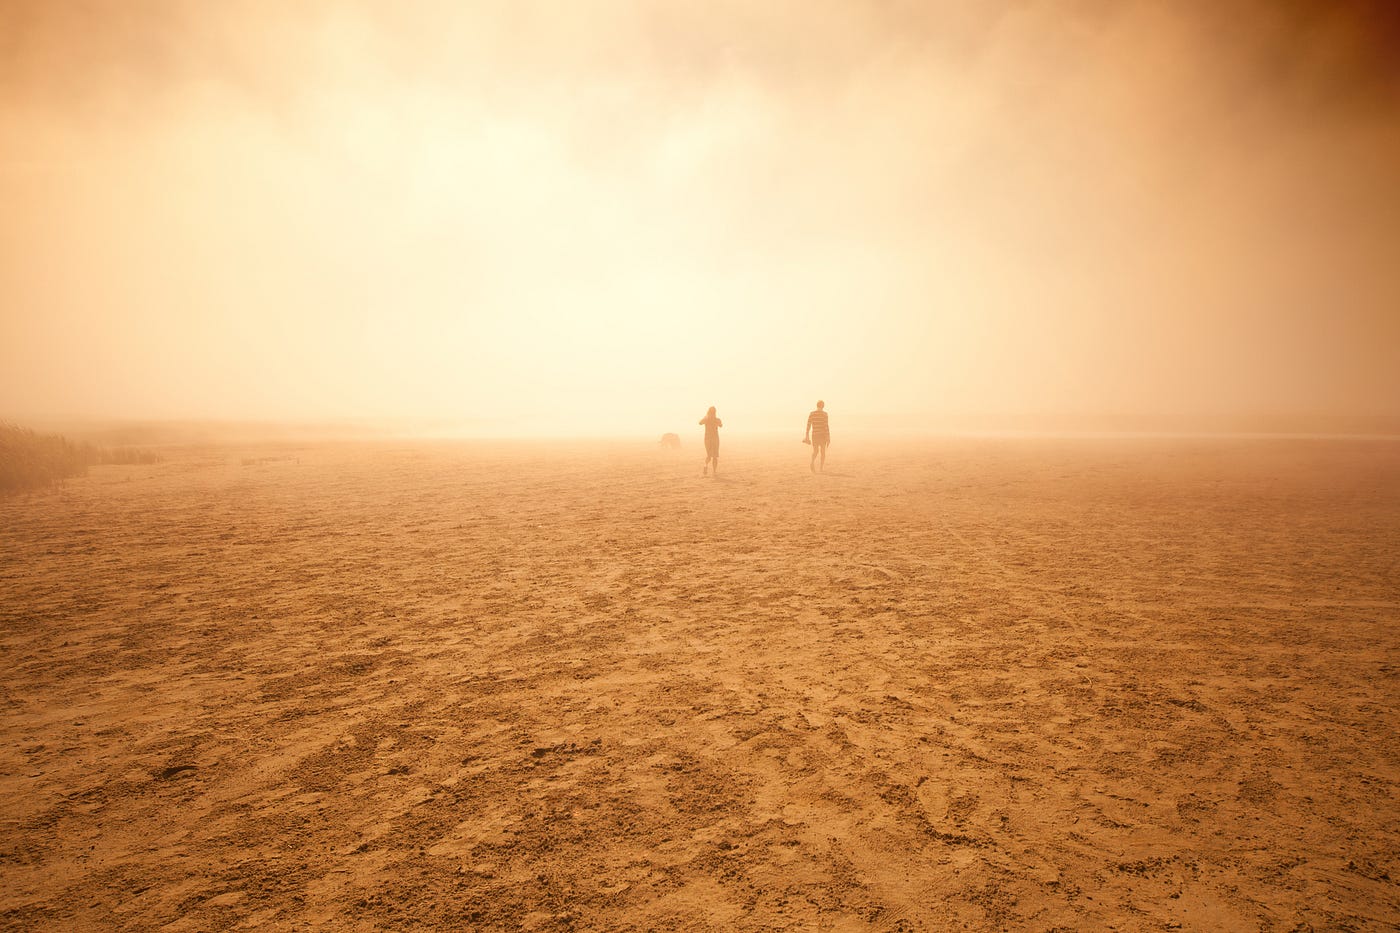 Two people walking in the background of a dessert. The sky is hazy and only the people’s silhouettes are visible.